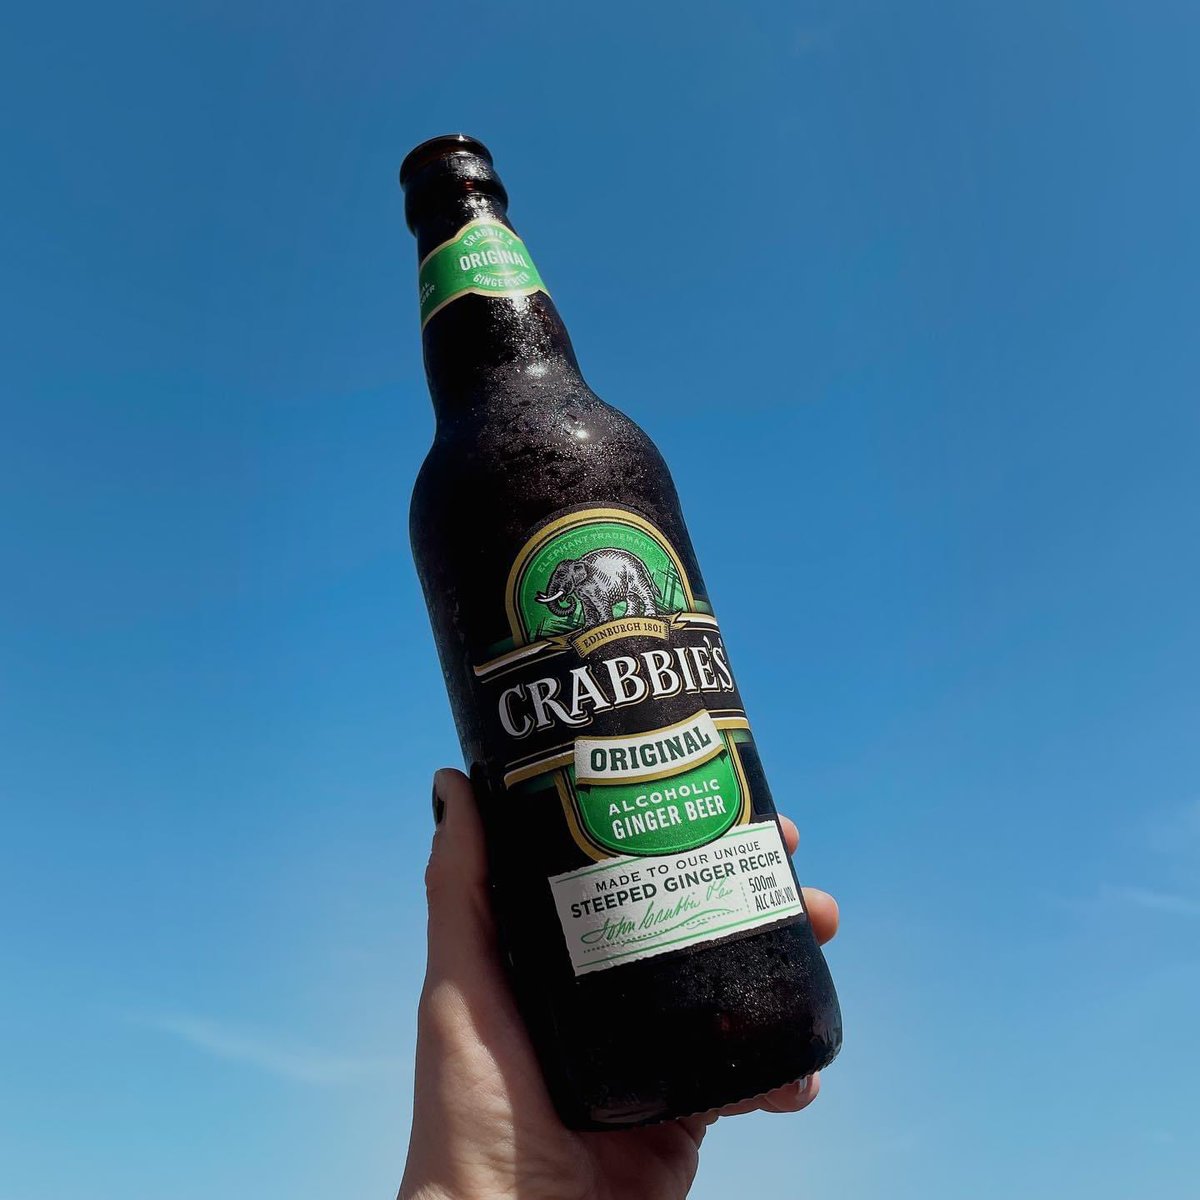 🍻 Happy Fri-yay sailors! 🍻 We’ll be kickstarting the weekend with Live screenings of the Rugby World Cup for all ye egg-ball fans! First England Game tomorrow with kick off at 8pm🏴󠁧󠁢󠁥󠁮󠁧󠁿 • • • #crabbiesgingerbeer #rugbyworldcup #theboathousefalmouth #eatlocal #eatfresh